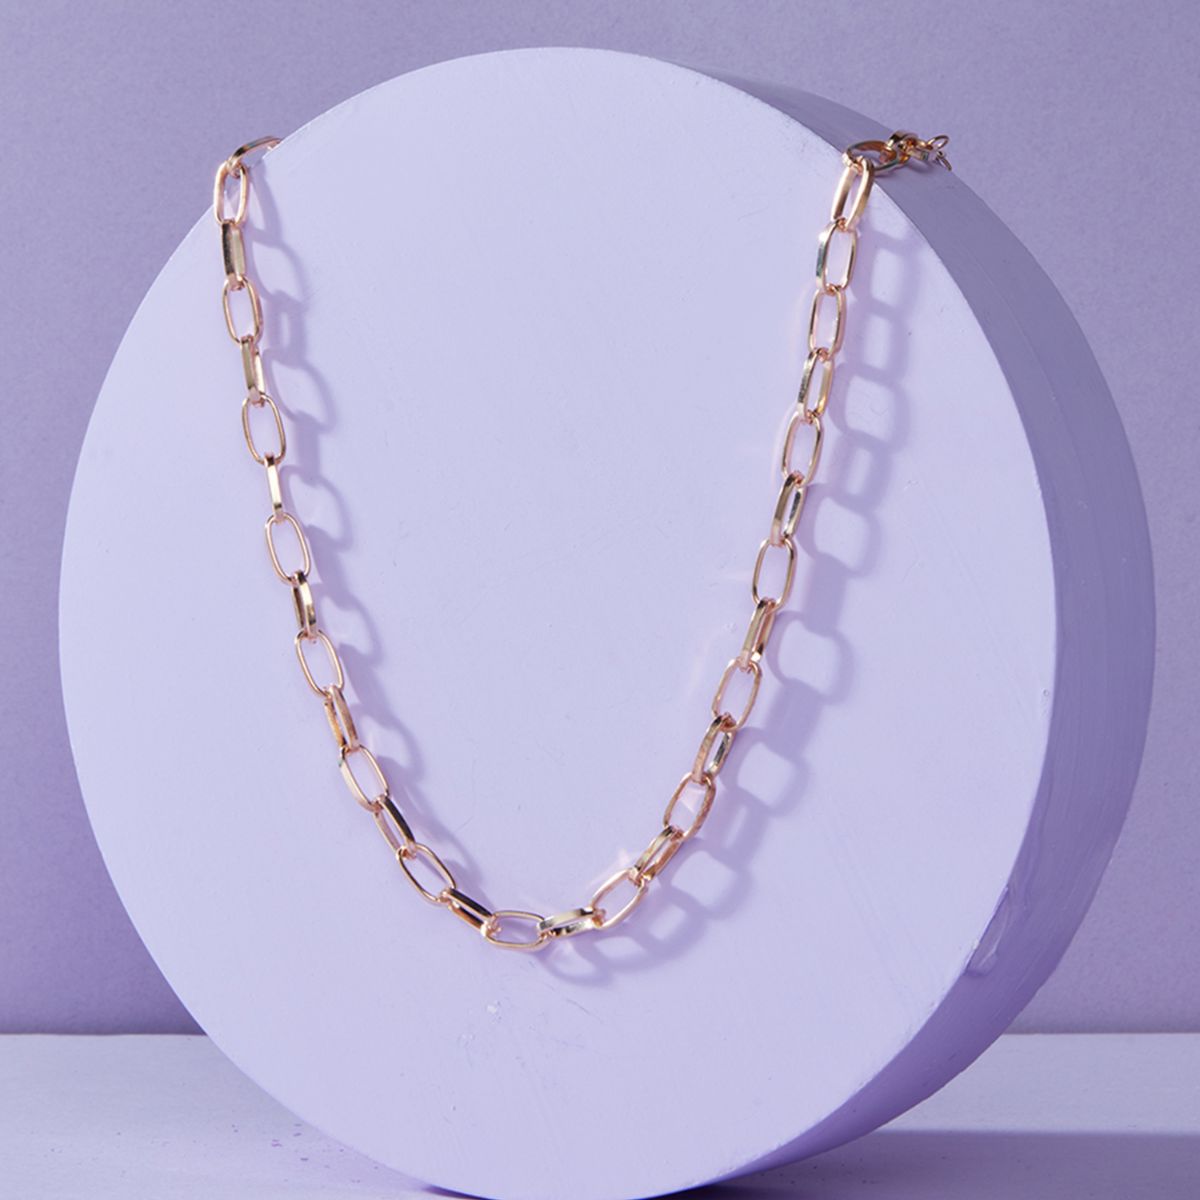 Gold Plated Statement Link Chain Necklace